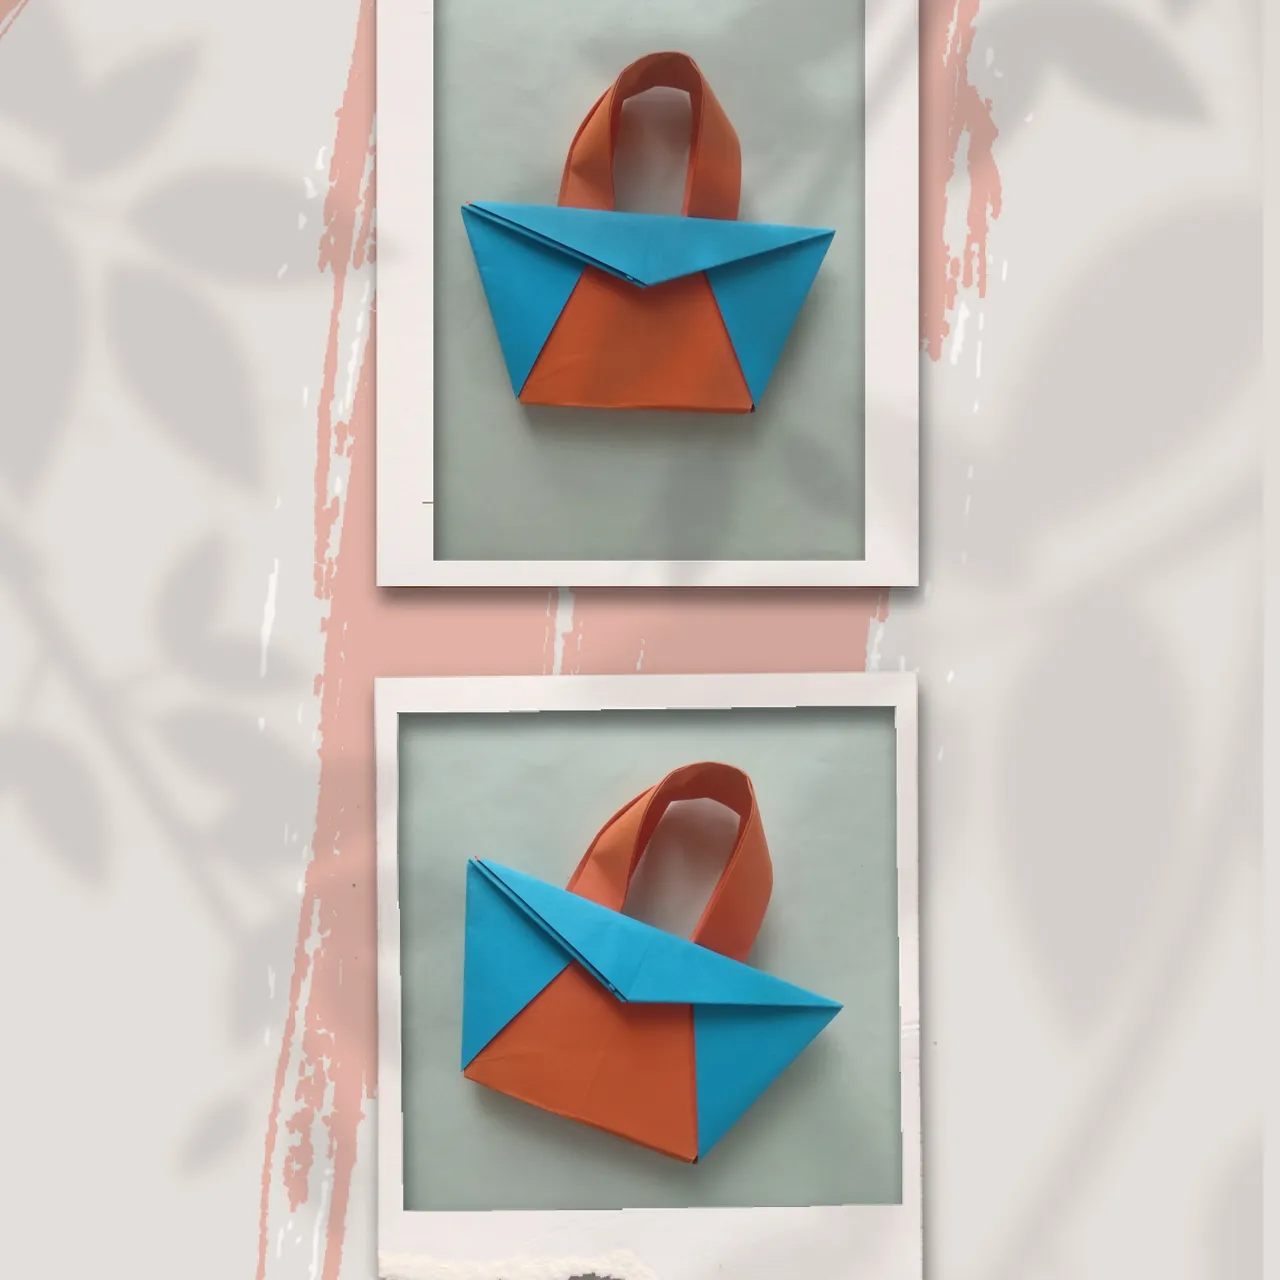 How To Make An Origami Gift Bag - Folding Instructions - Origami Guide